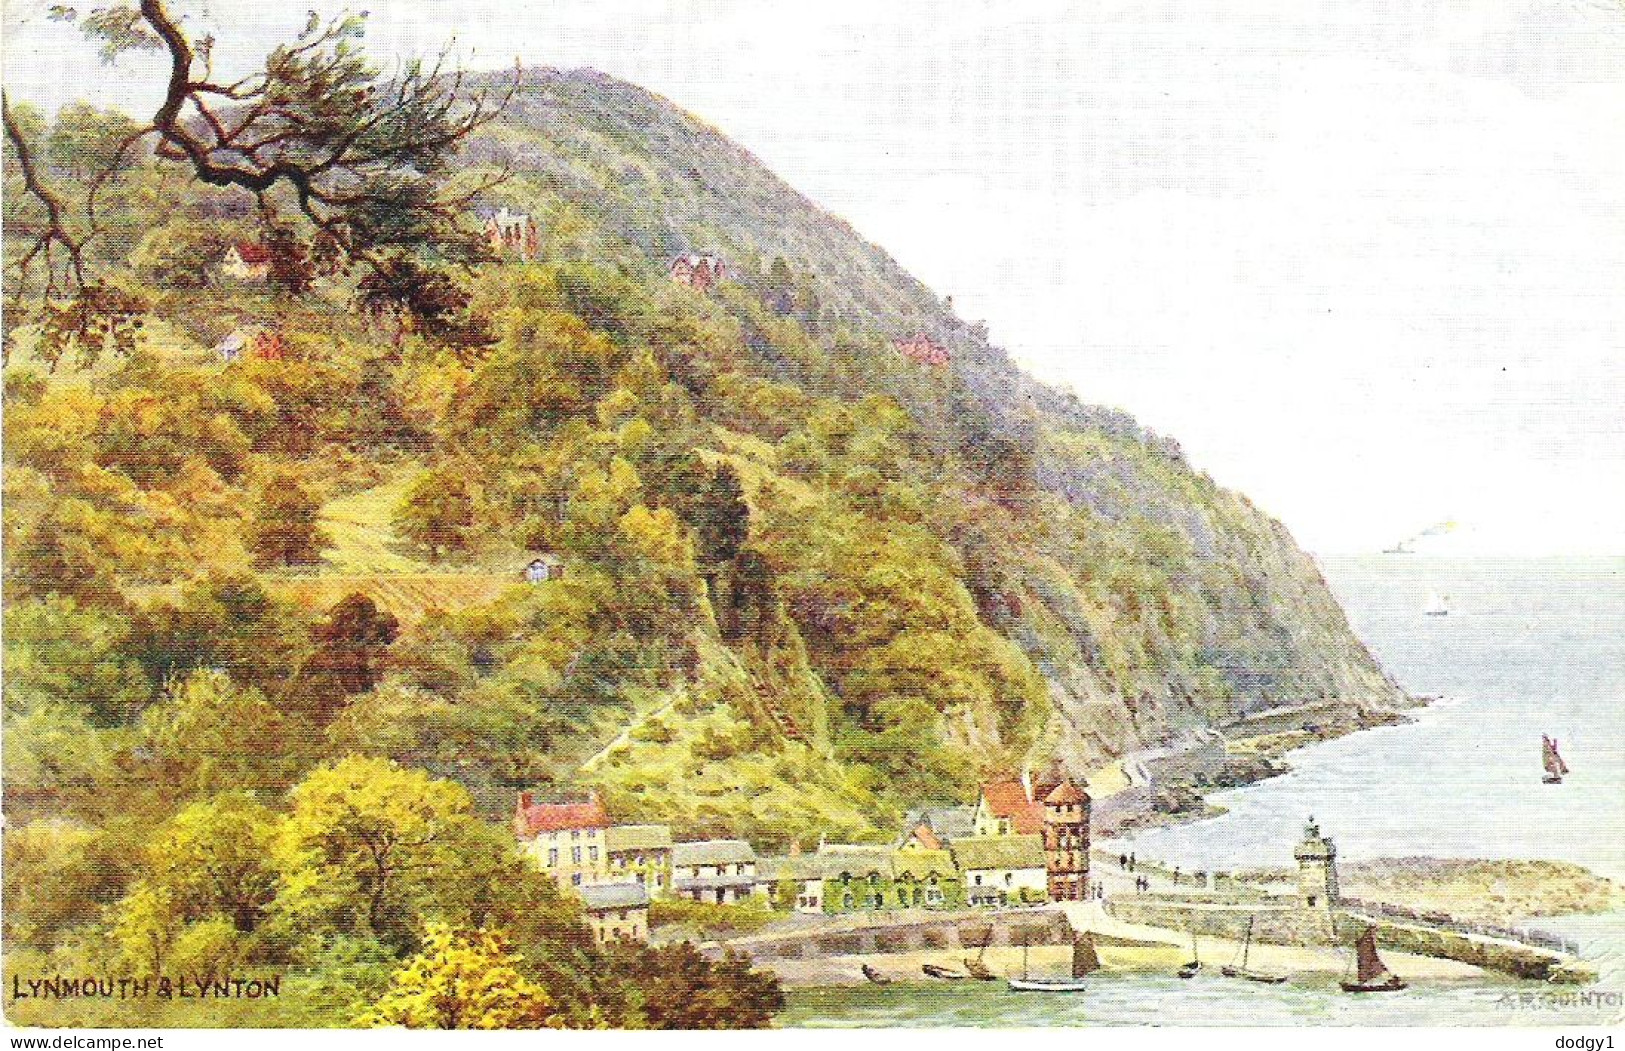 LYNMOUTH & LYNTON, DEVON FROM A PAINTING. USED POSTCARD M2 - Lynmouth & Lynton